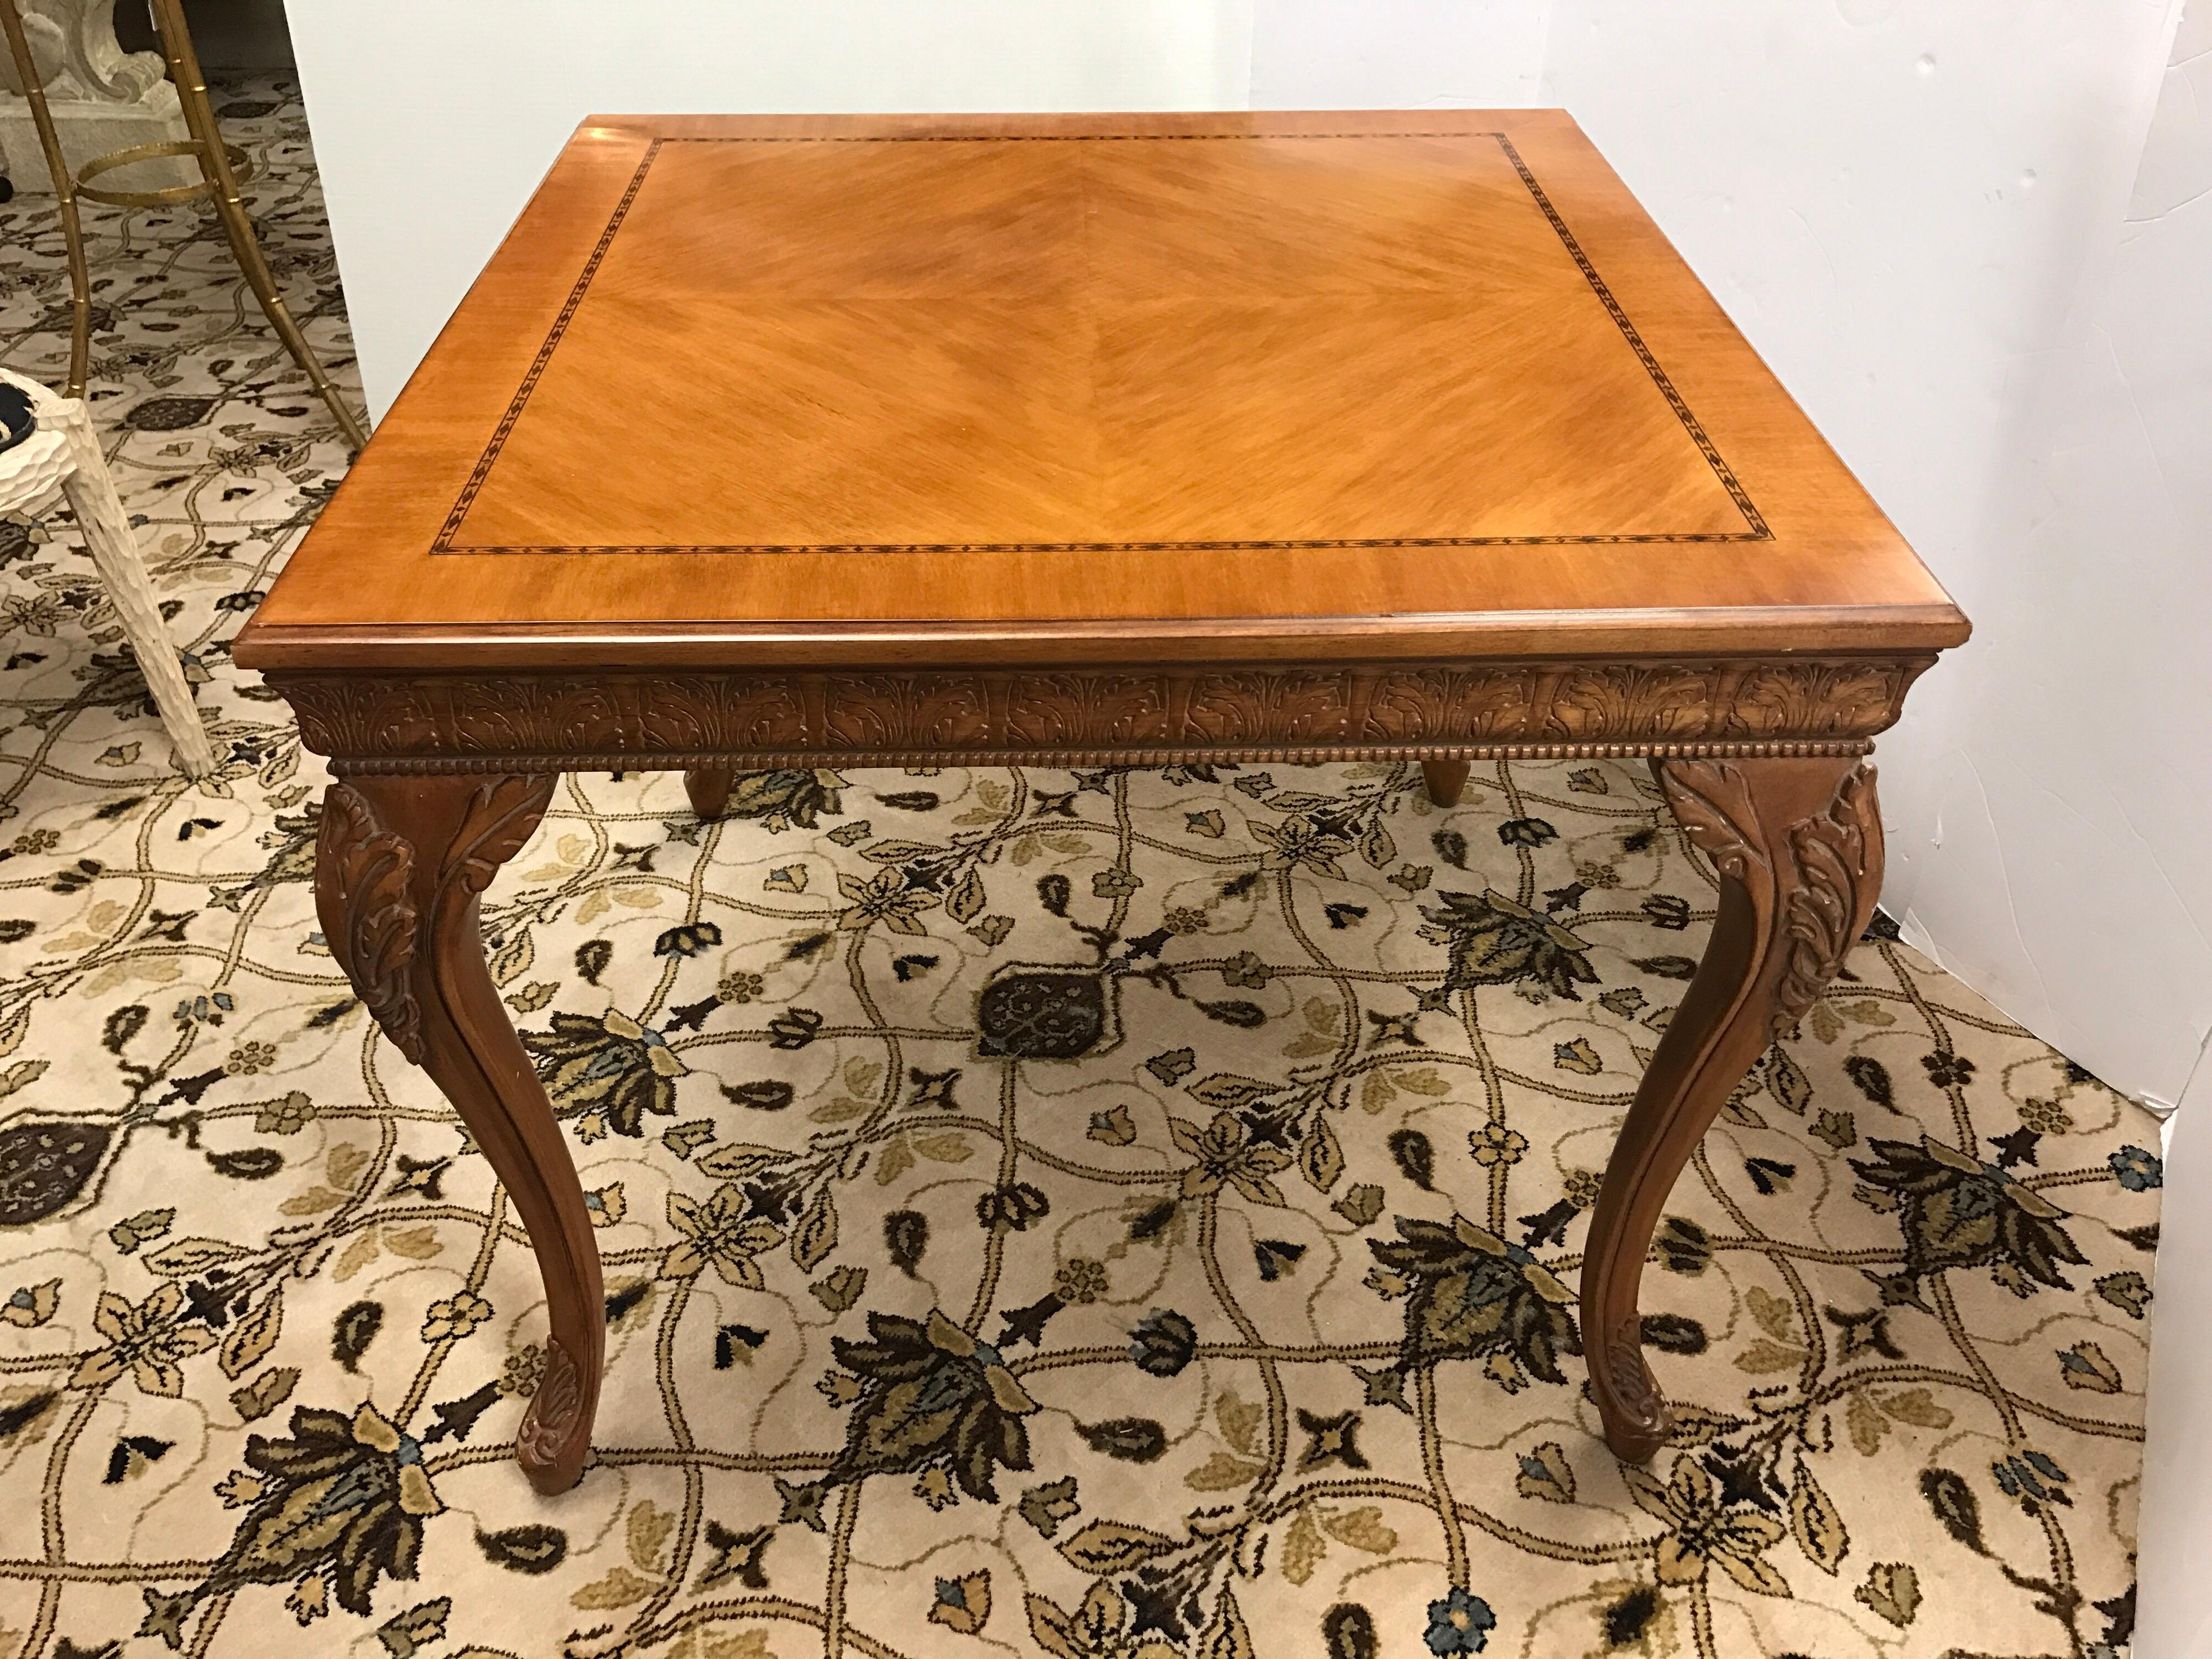 Intricately carved game table done in fruitwood with banding on top and highly carved detail on legs and apron set on delicate cabriole legs.